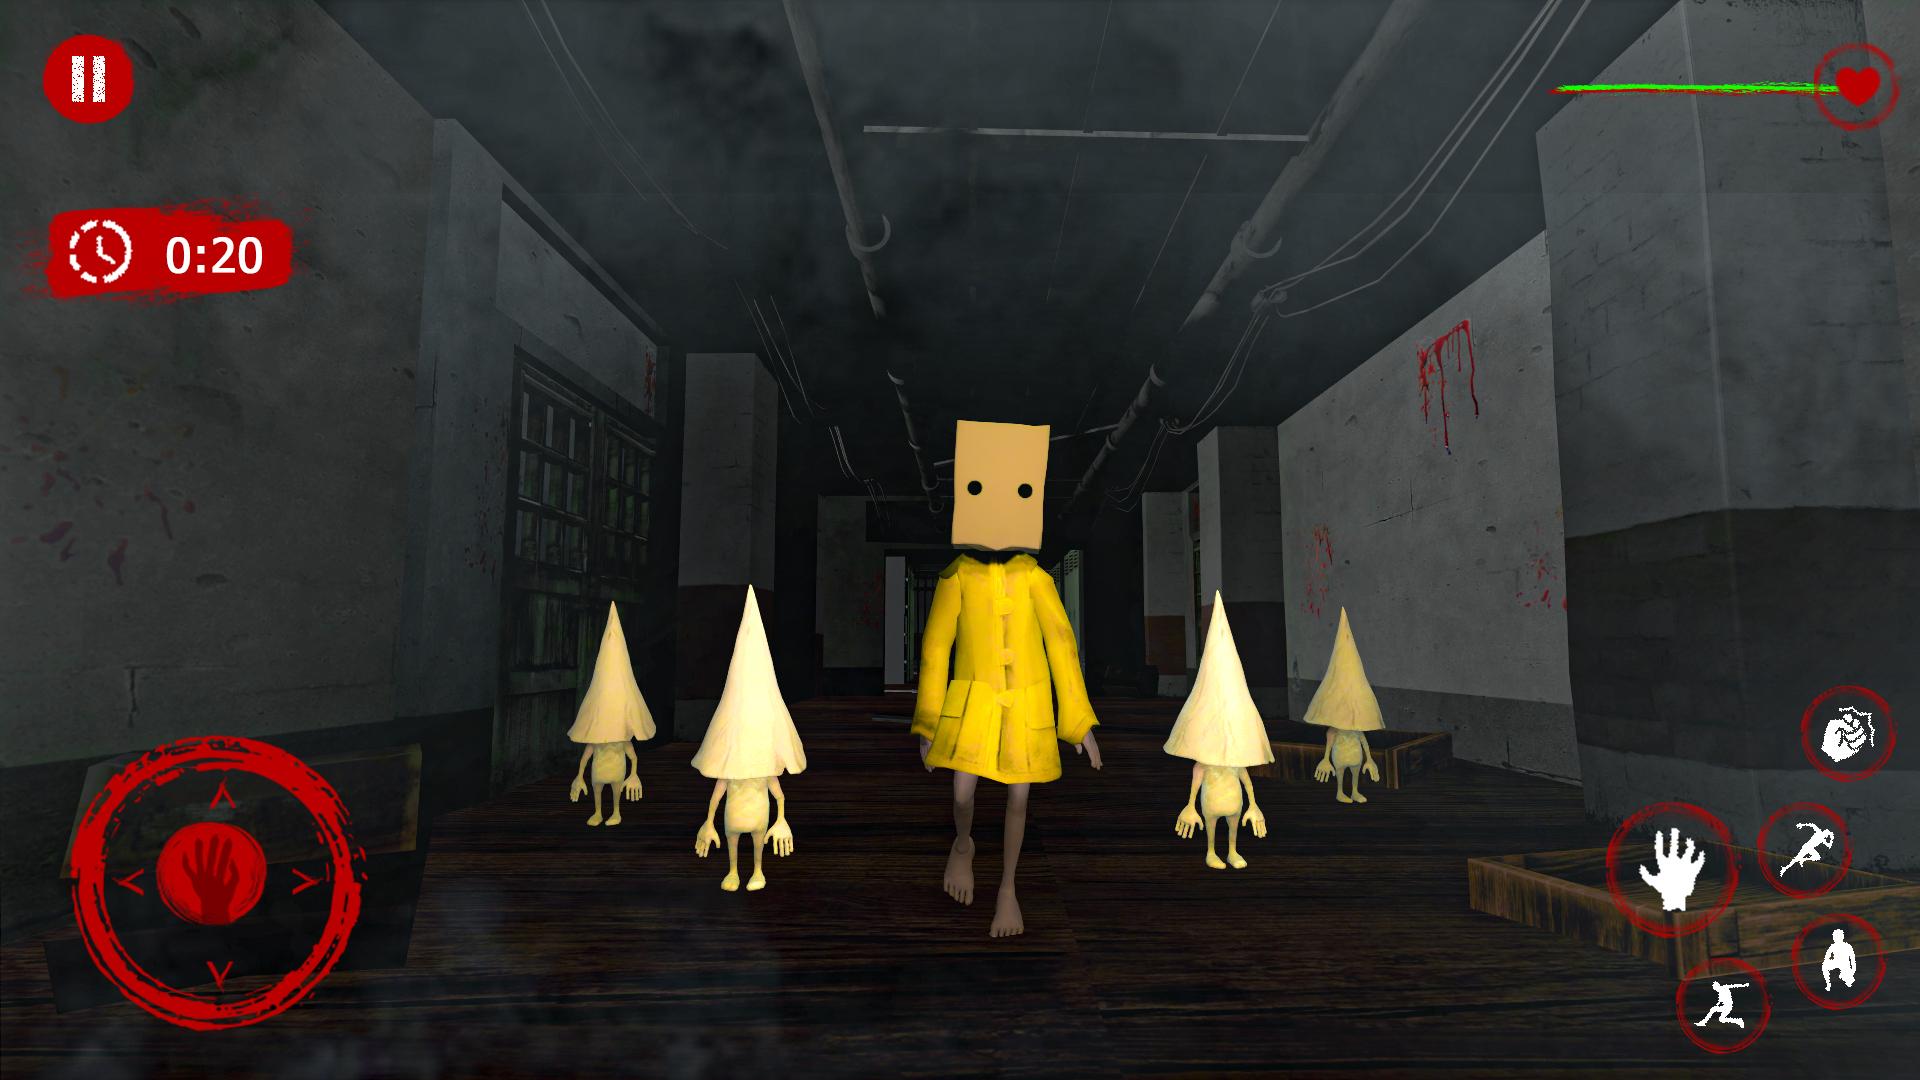 Little Scary Nightmares 2 - Haunted House Escape 0.1 Screenshot 7